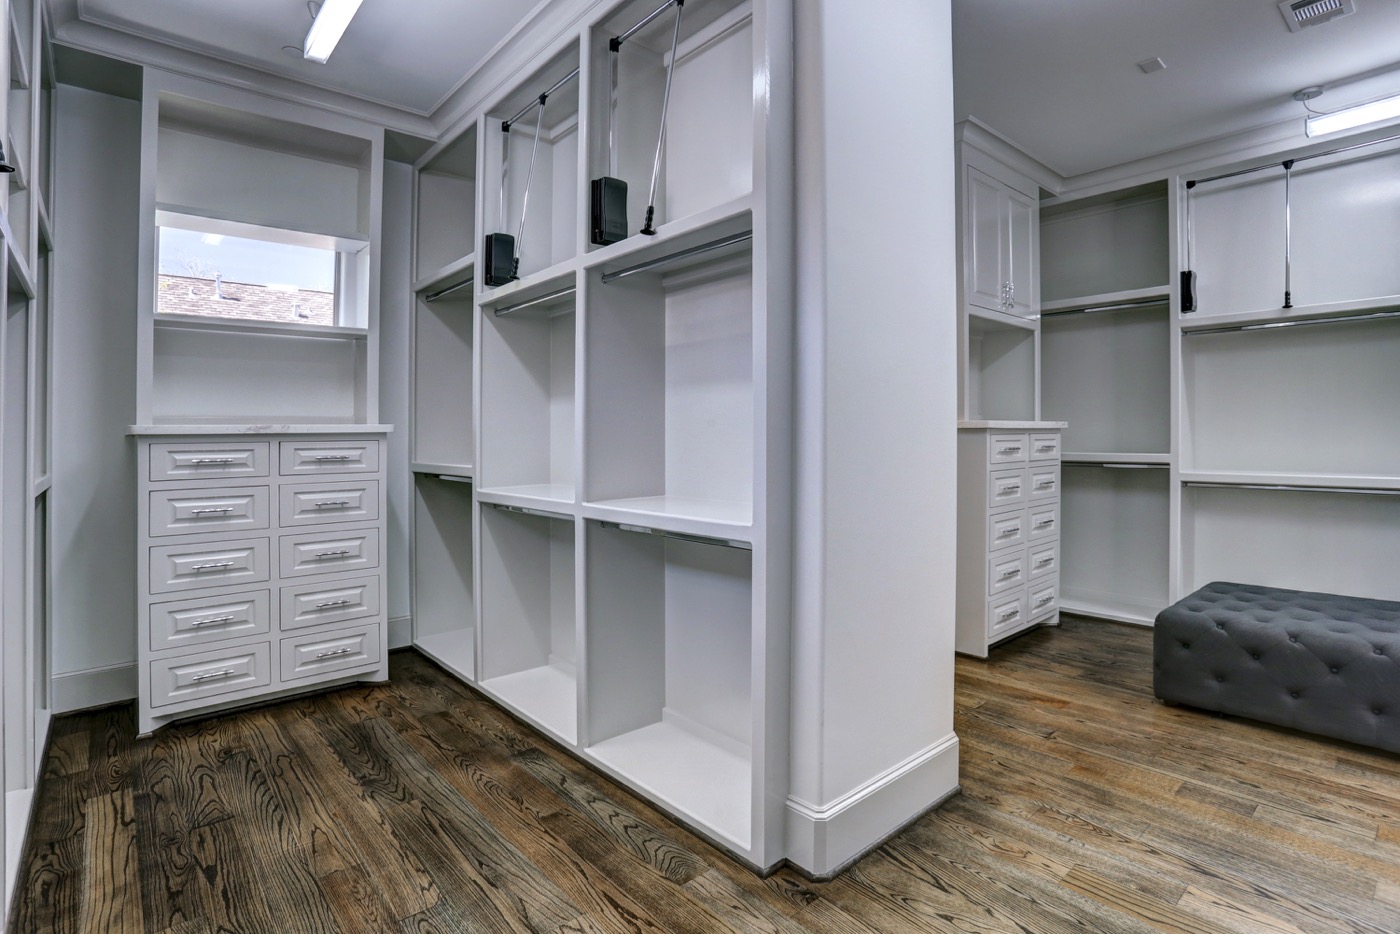 Spacious master closet has pull-downs for optimal use of the high ceilings